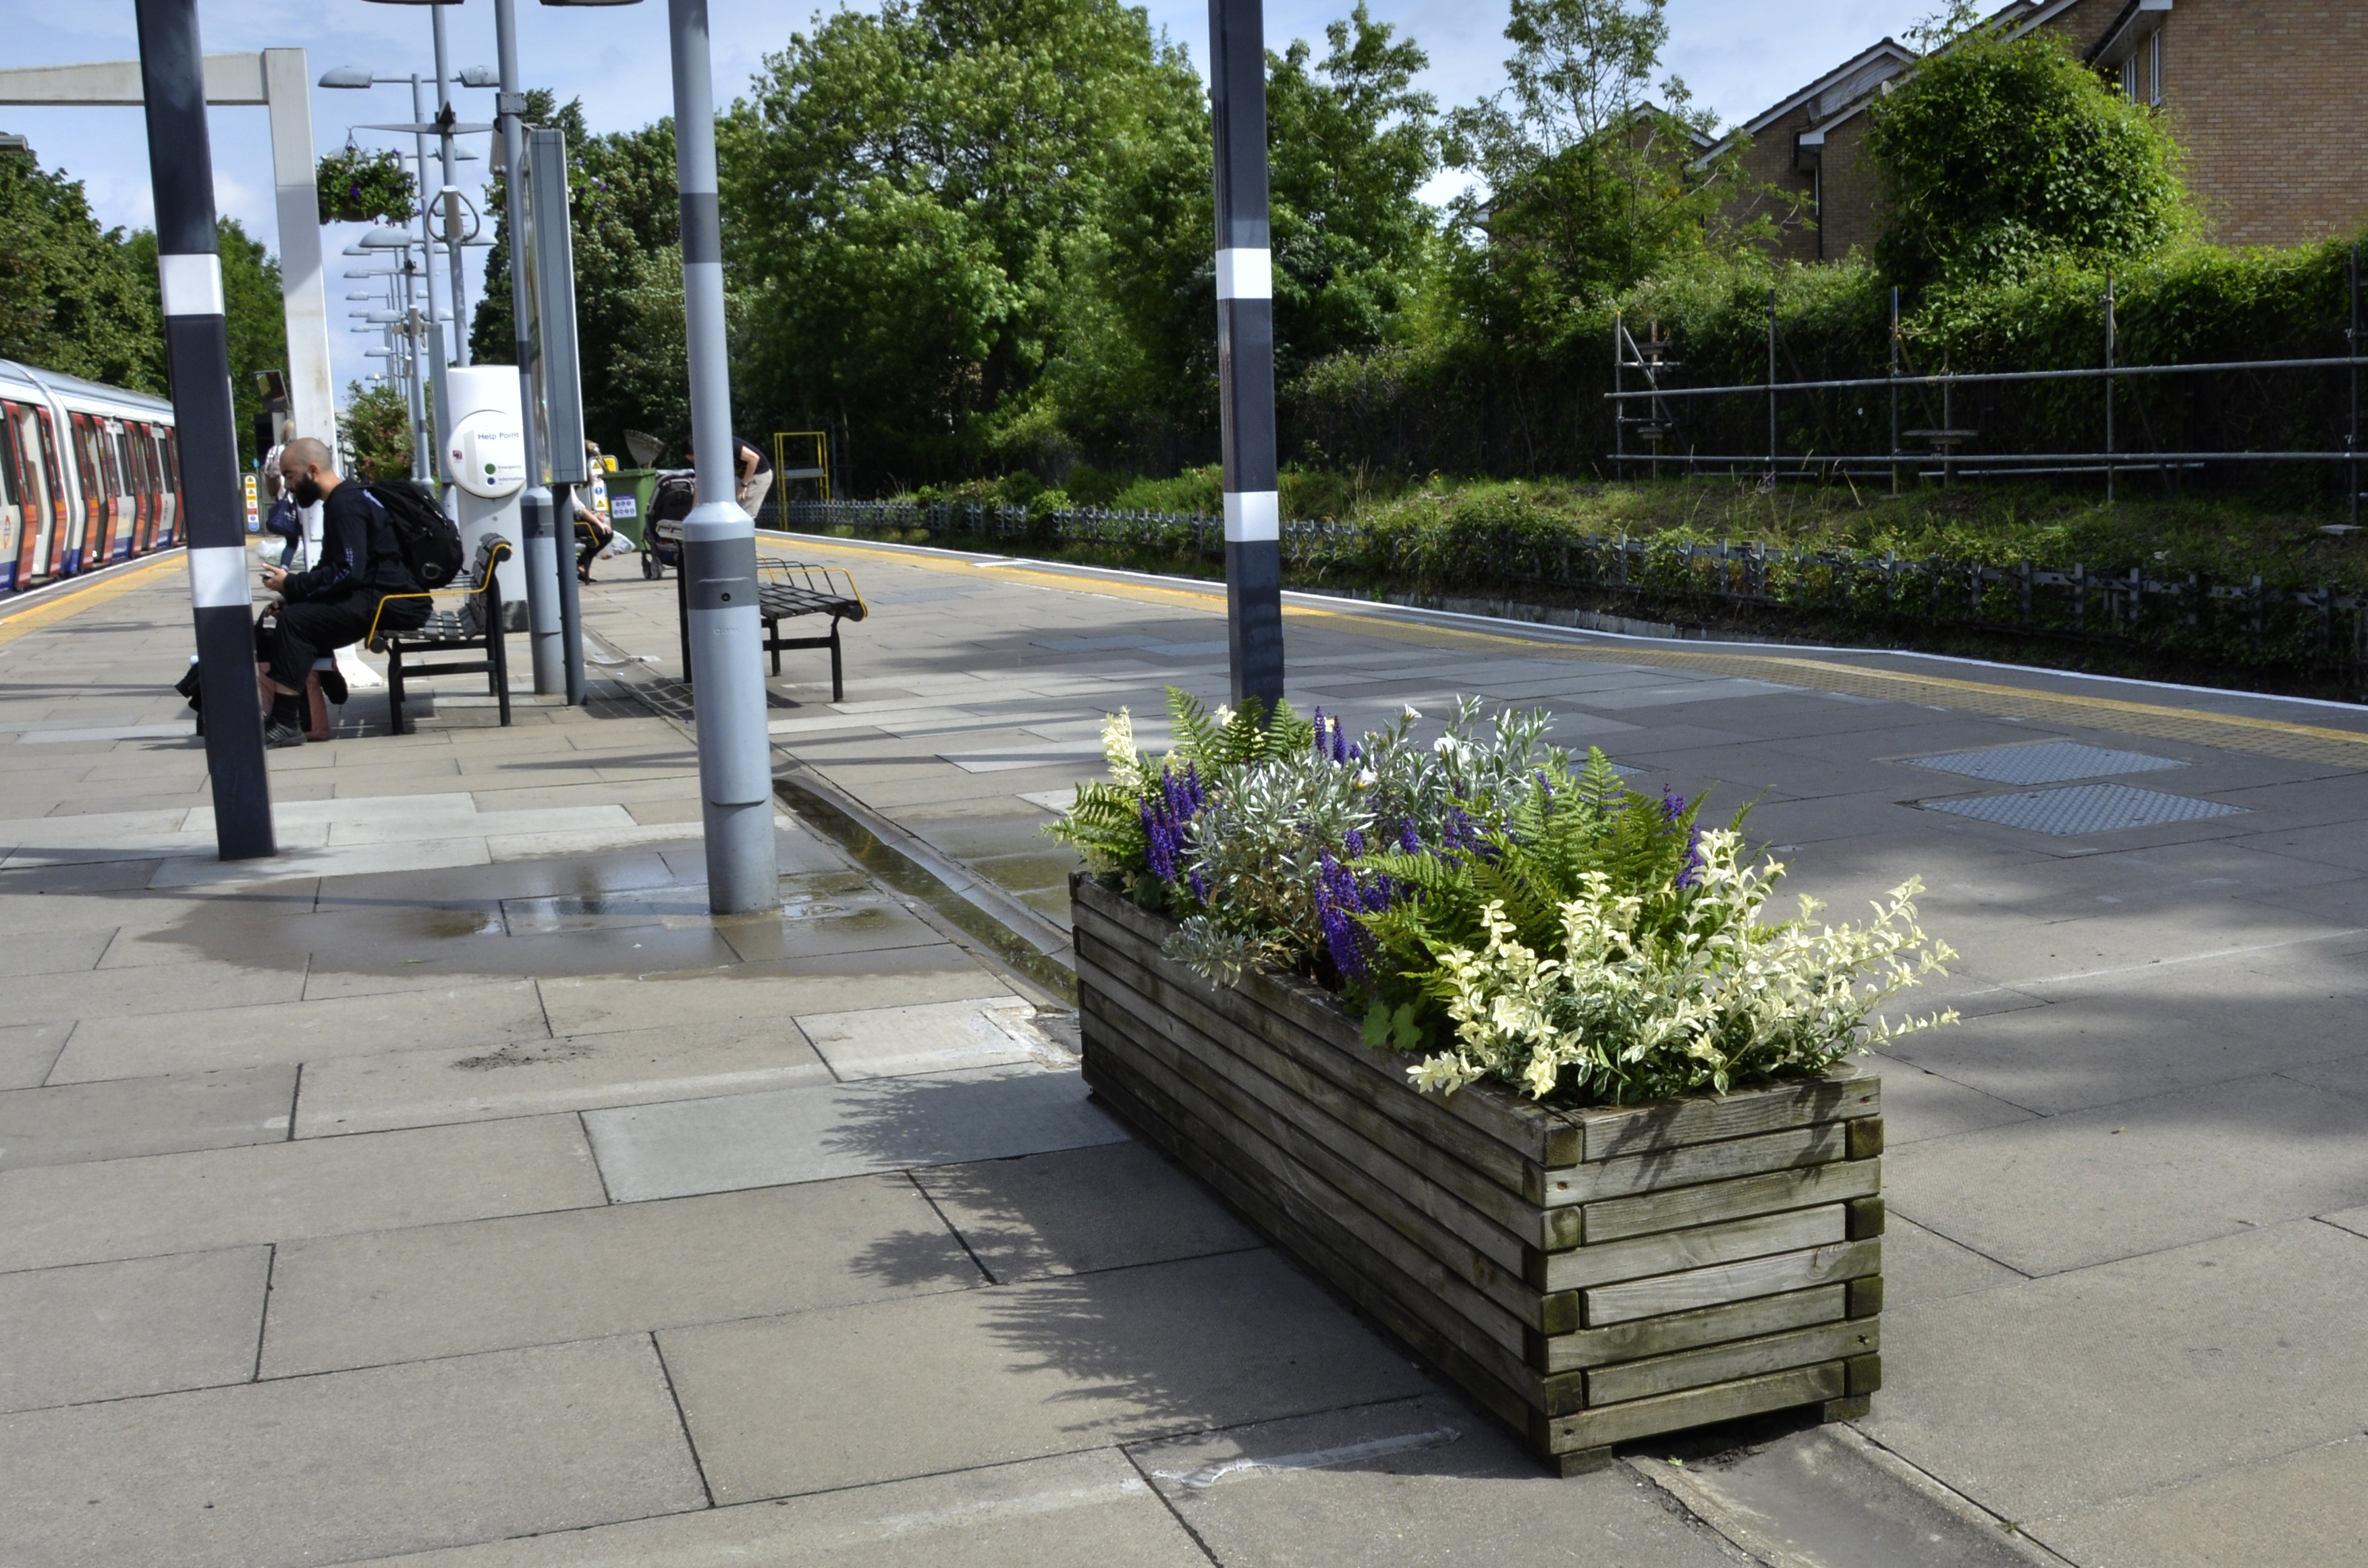 20160618-Wandsworth_Summer_Flora_Preparation-for-Wimbledon-started-today